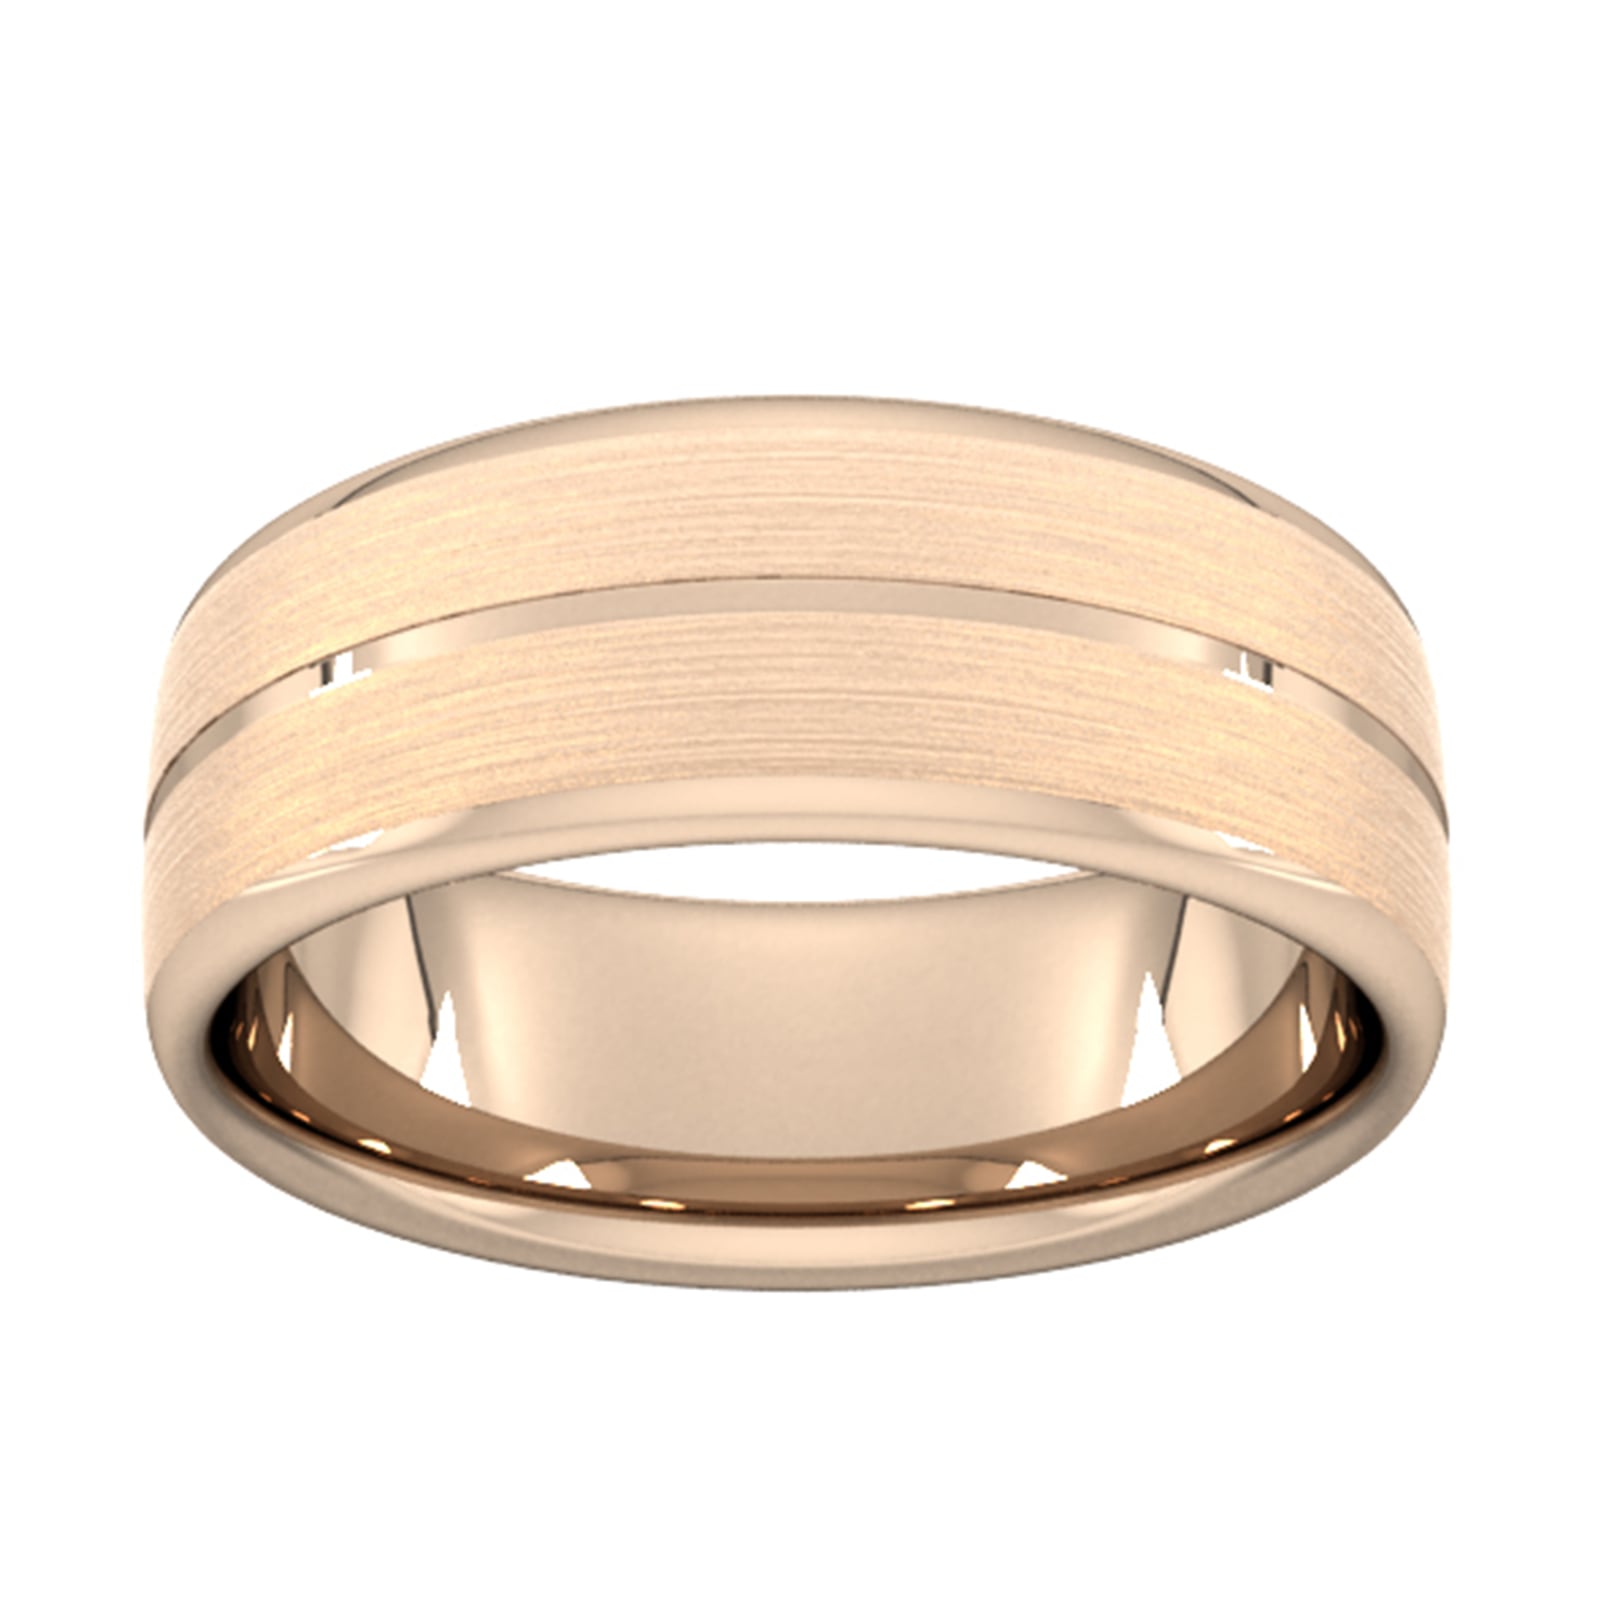 8mm D Shape Standard Centre Groove With Chamfered Edge Wedding Ring In 9 Carat Rose Gold - Ring Size U